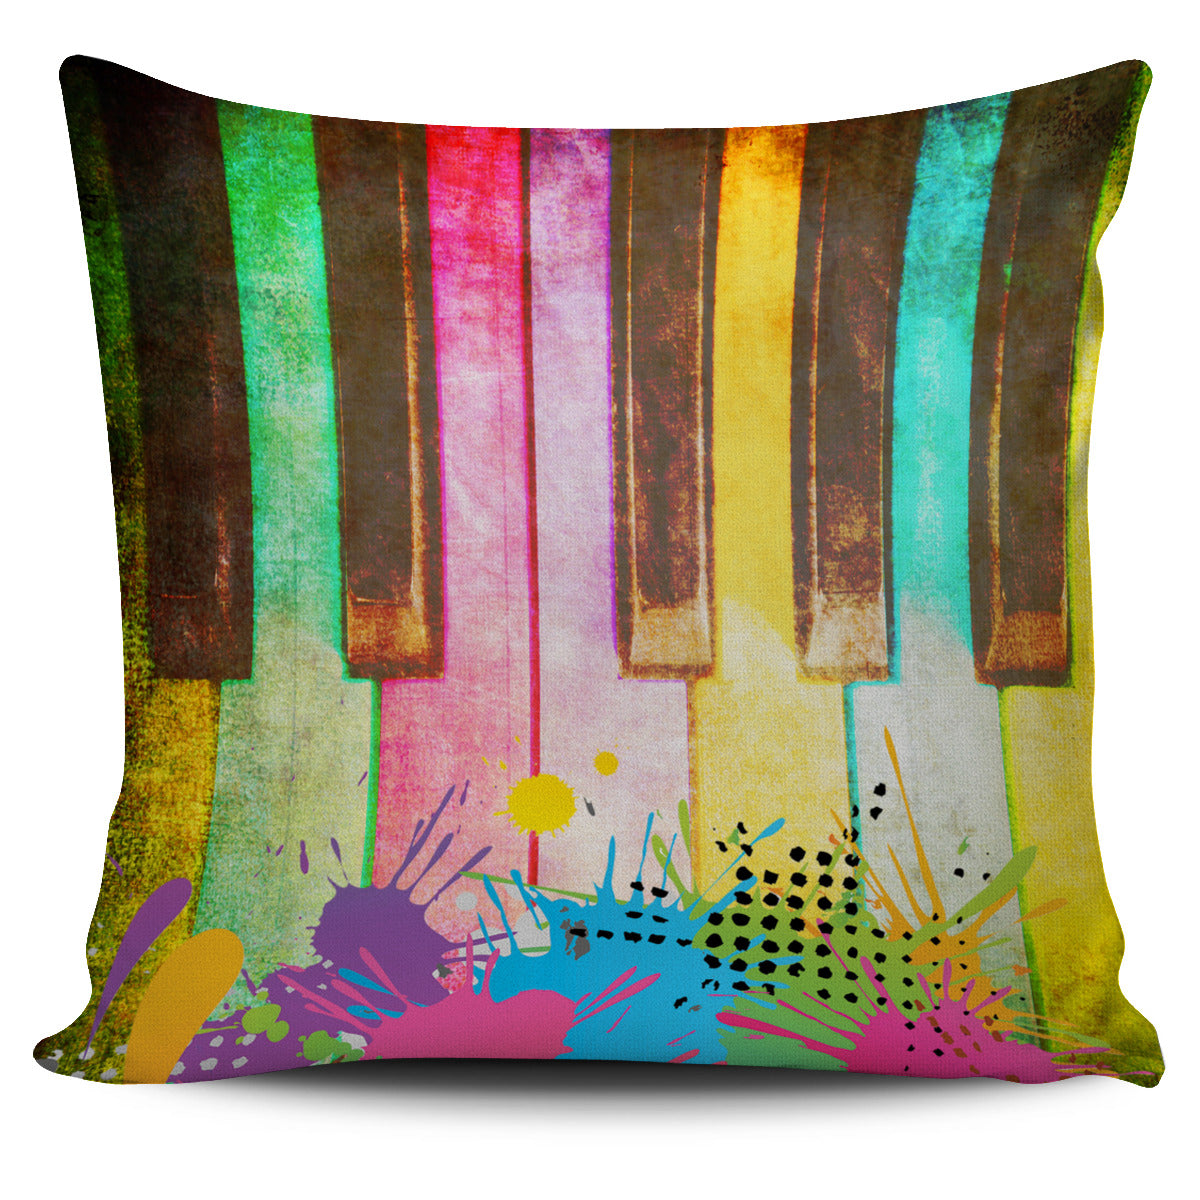 Piano Grunge Pillow Cover